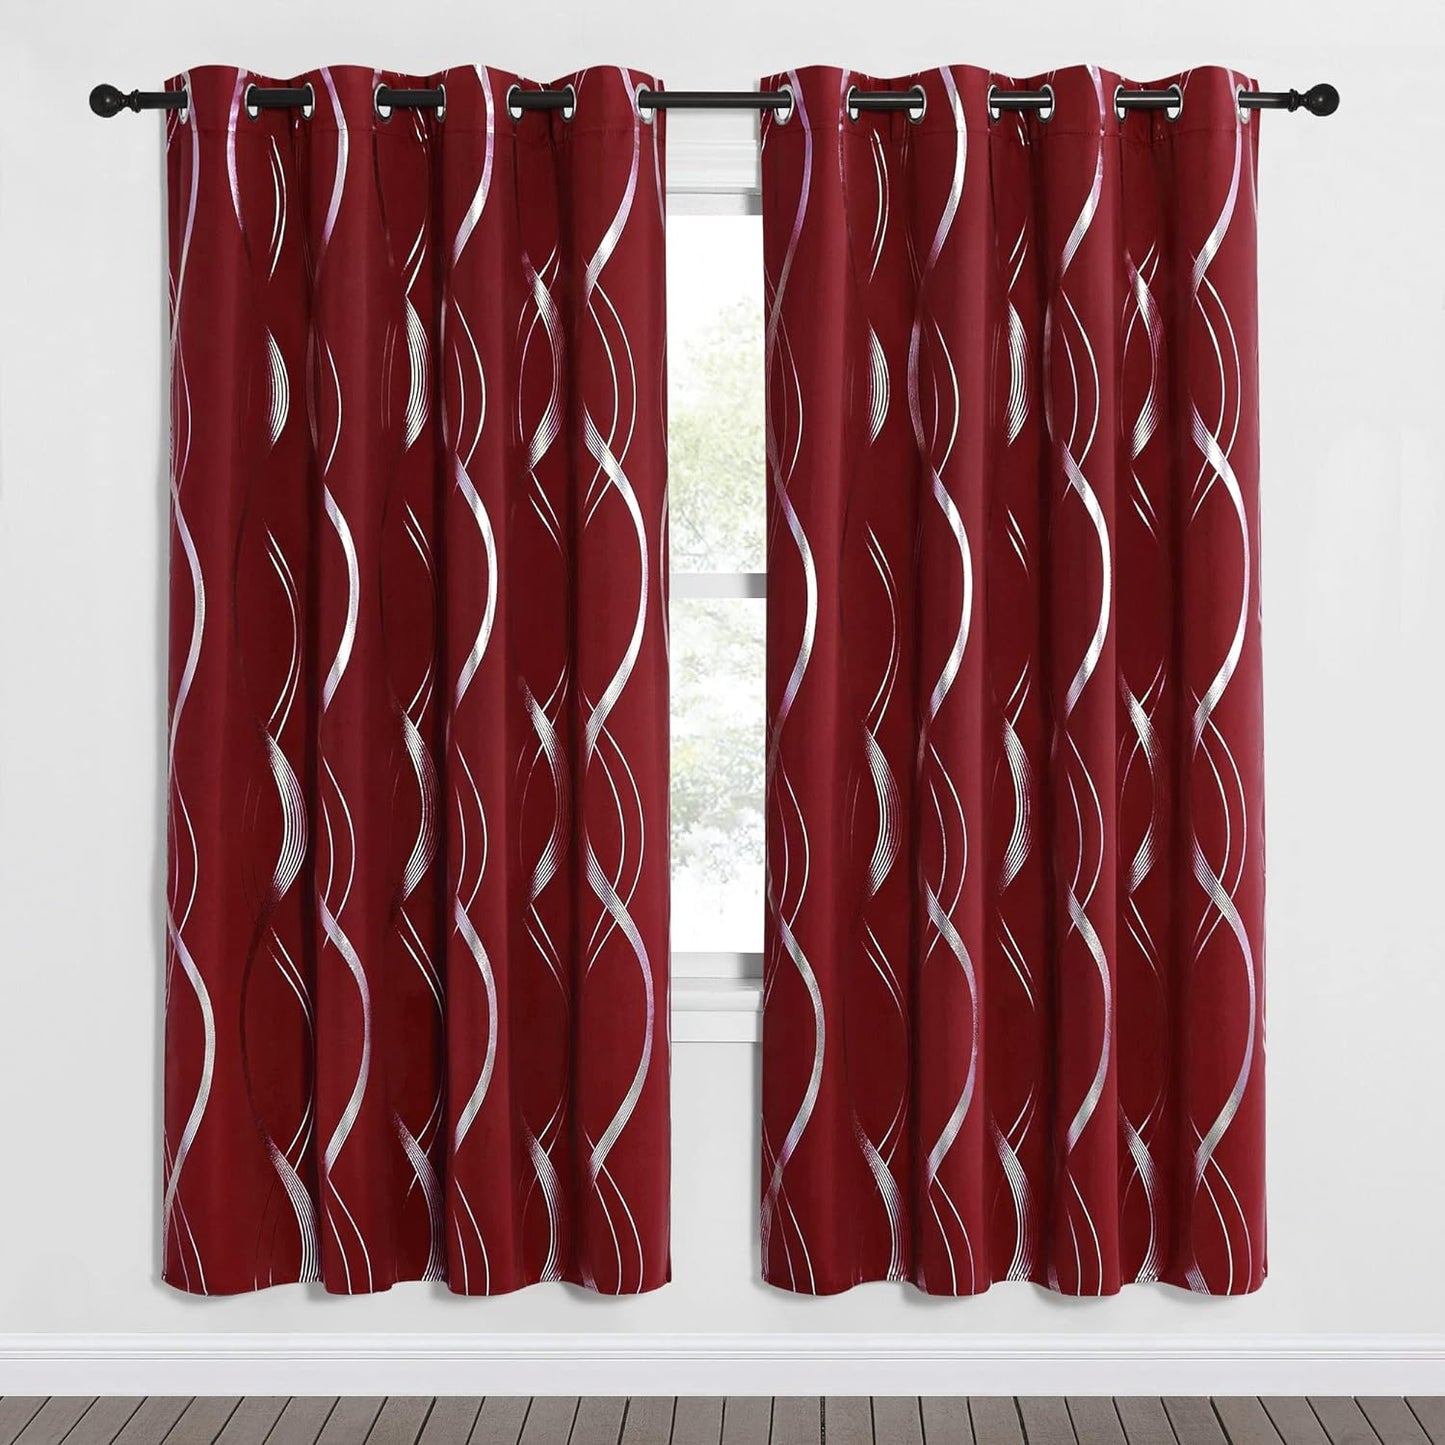 NICETOWN Grey Blackout Curtains 84 Inch Length 2 Panels Set for Bedroom/Living Room, Noise Reducing Thermal Insulated Wave Line Foil Print Drapes for Patio Sliding Glass Door (52 X 84, Gray)  NICETOWN Burgundy Red 52"W X 72"L 